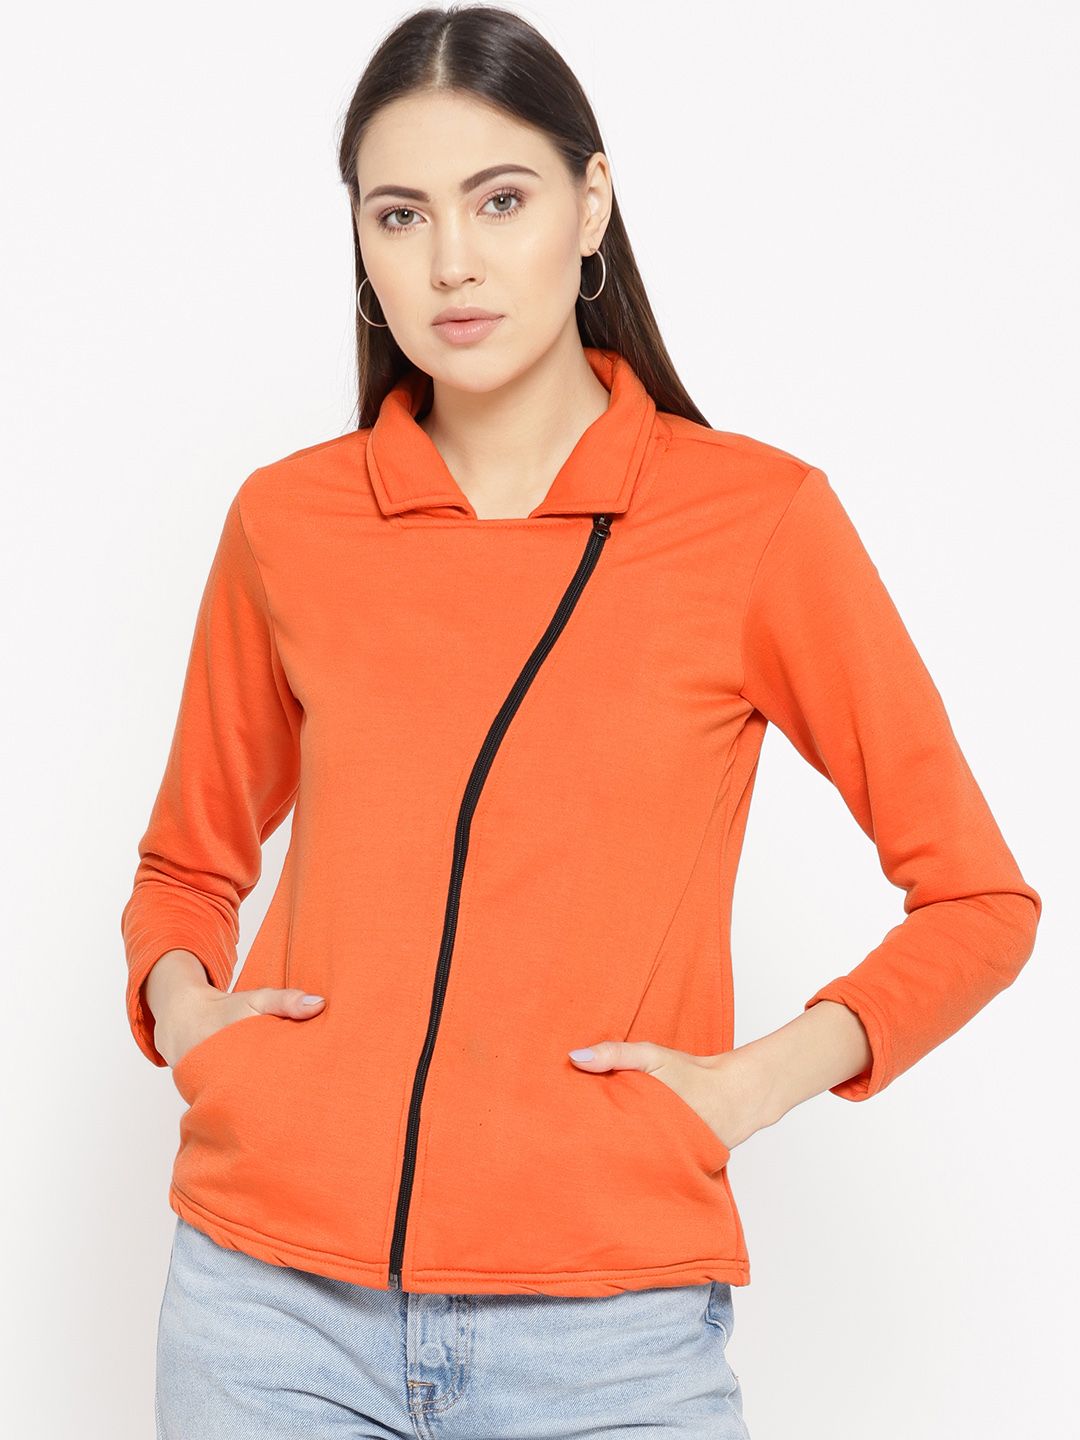 Belle Fille Women Orange Solid Asymmetric Closure Tailored  Jacket Price in India